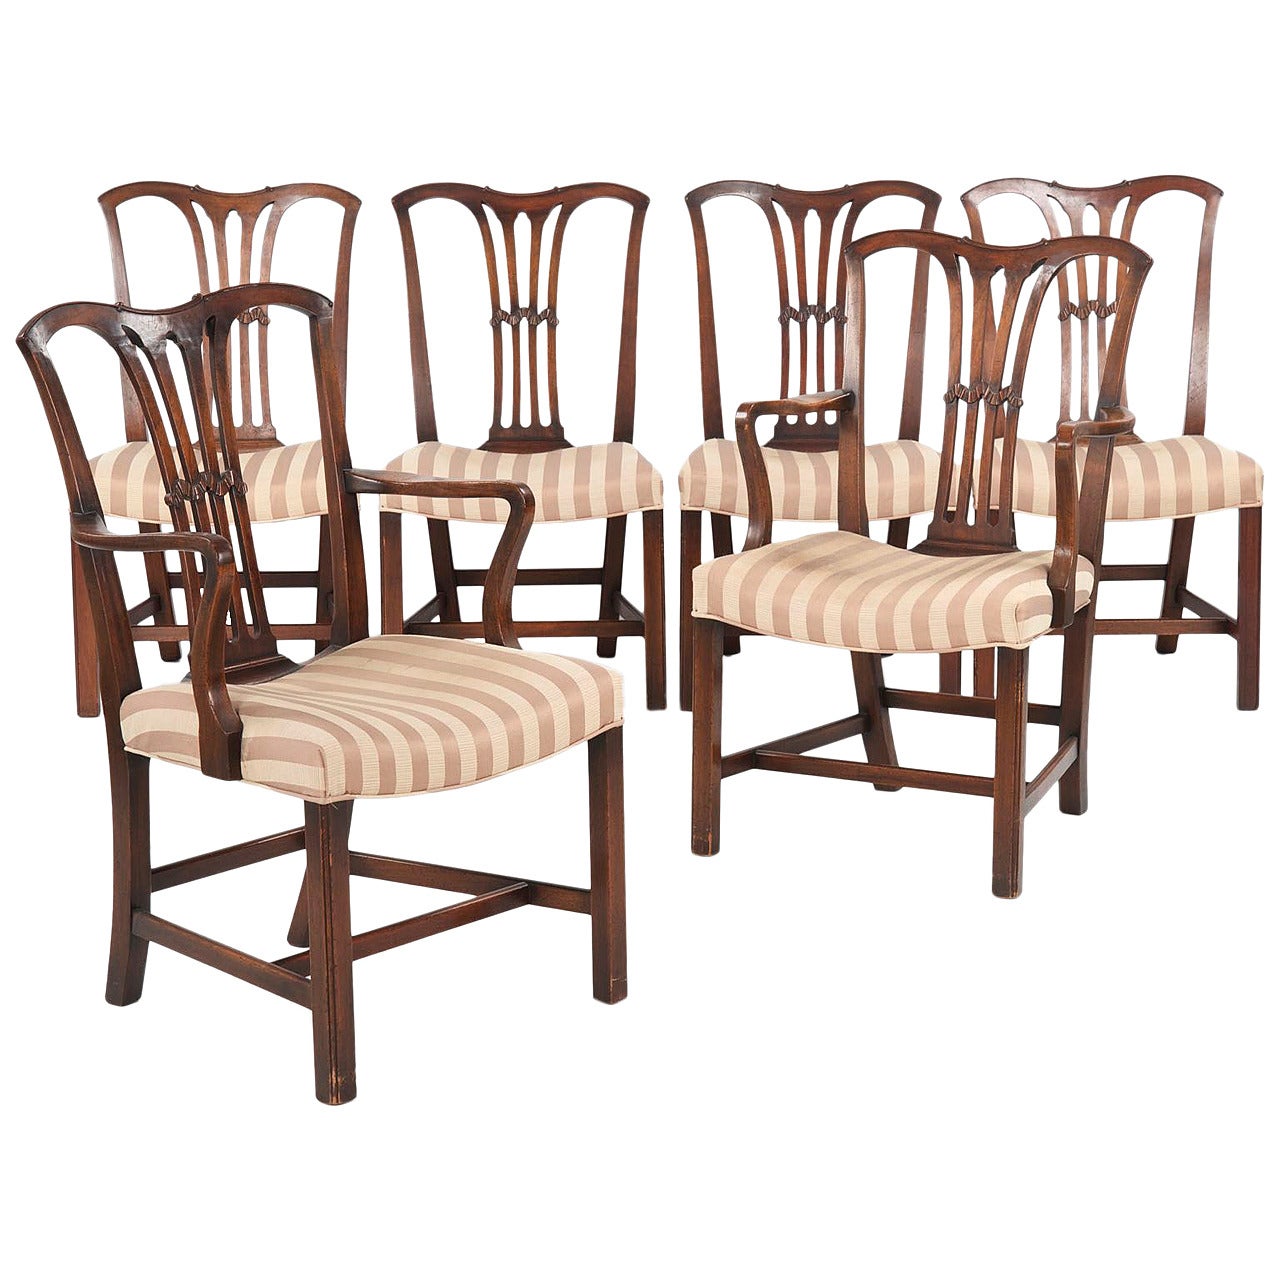 Set of Six Chippendale Style Antique Dining Chairs, 19th Century